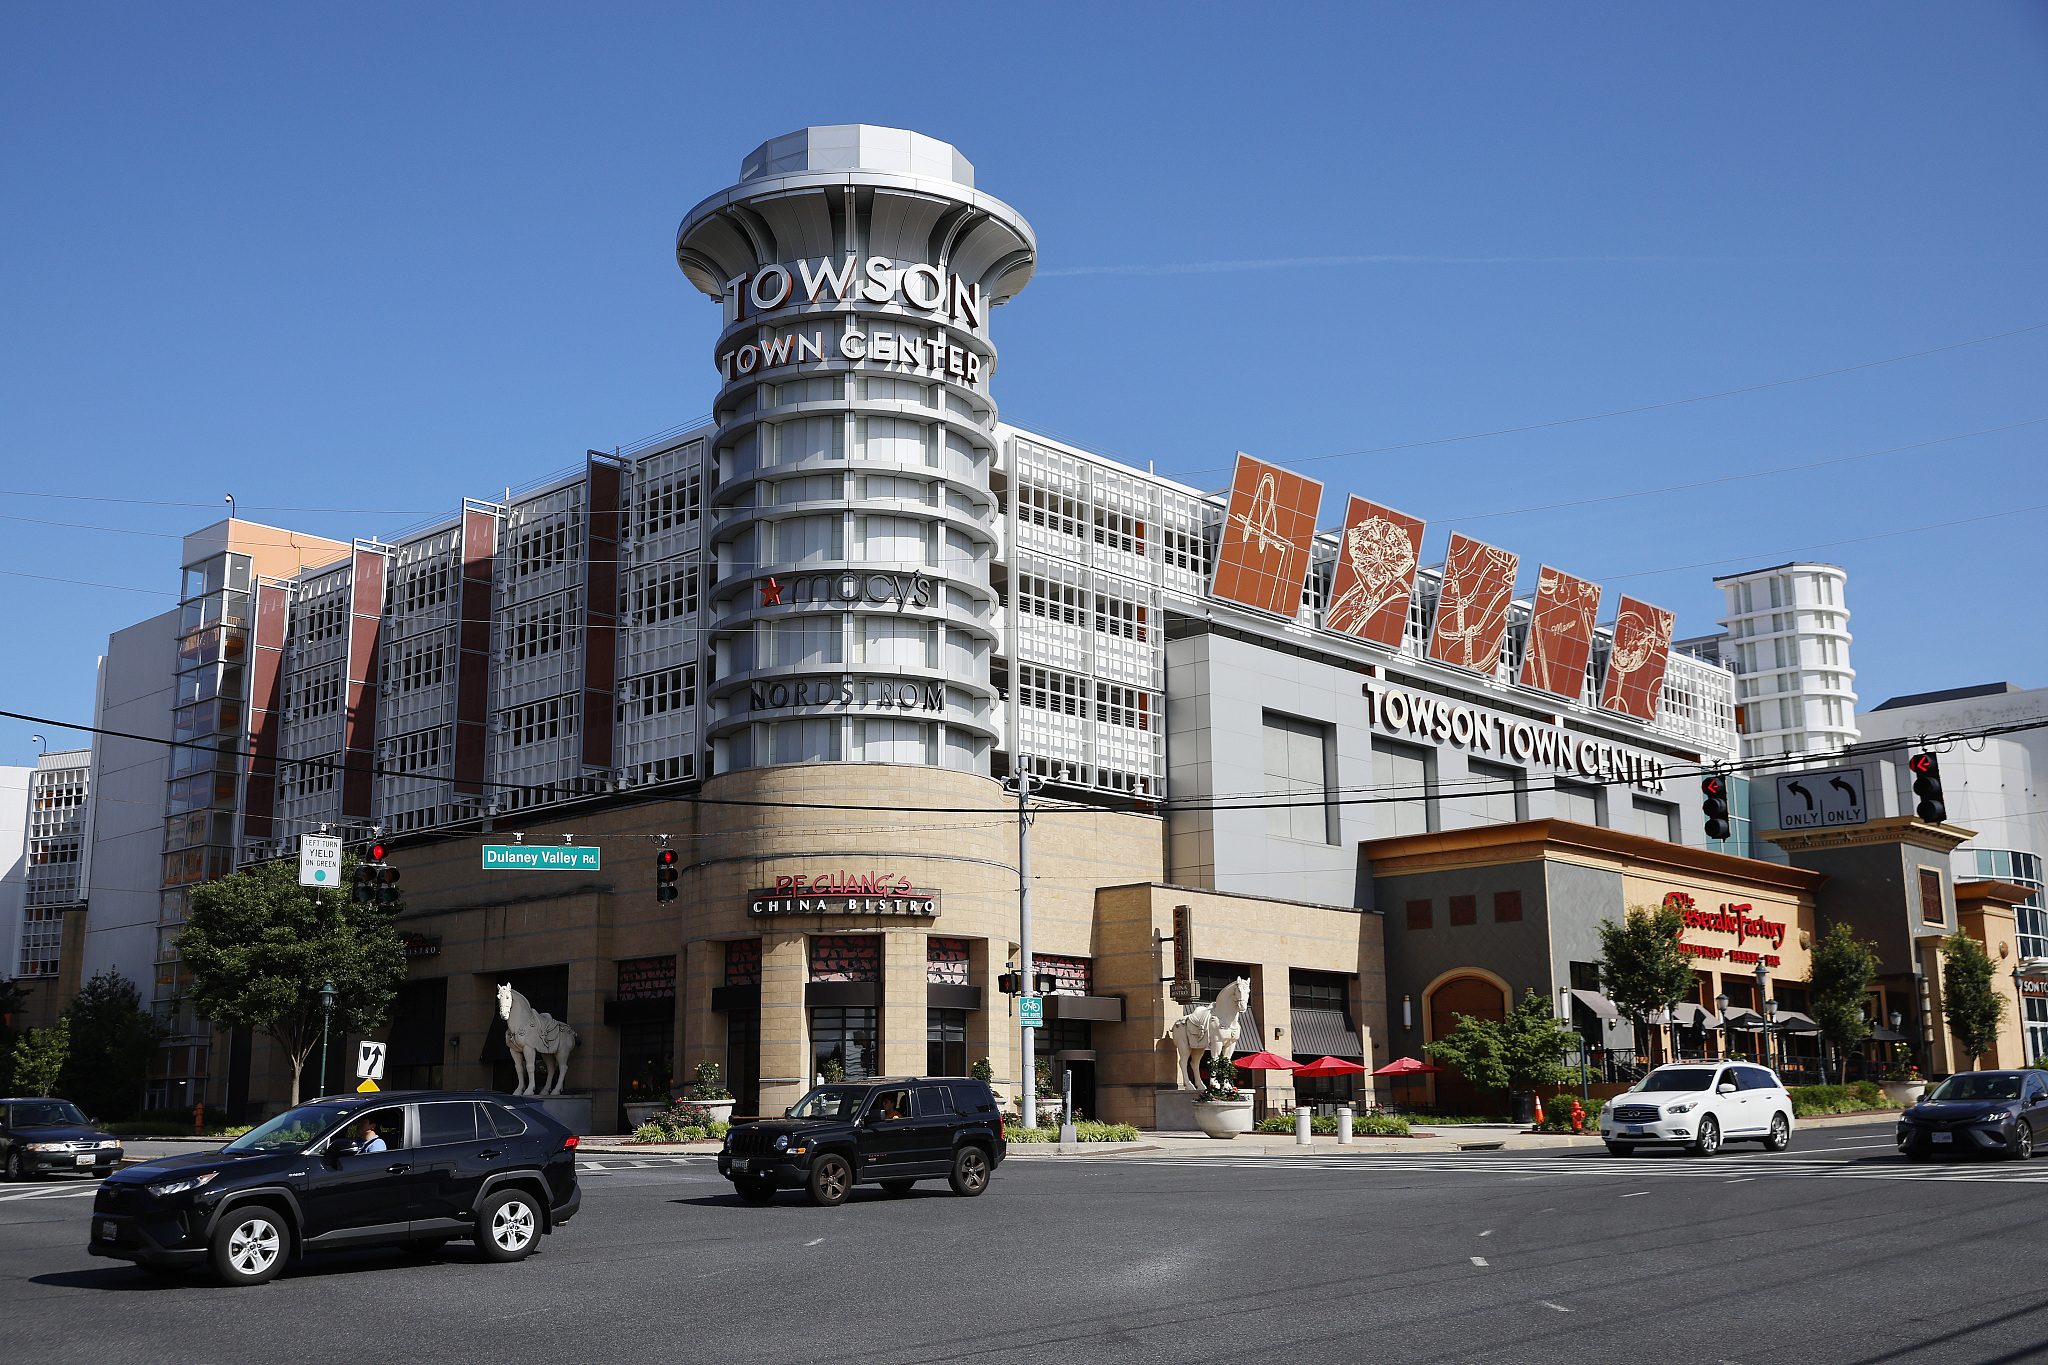 An exterior view of the Towson Town Center mall in Towson, Maryland, the United States, June 20, 2022. /CFP